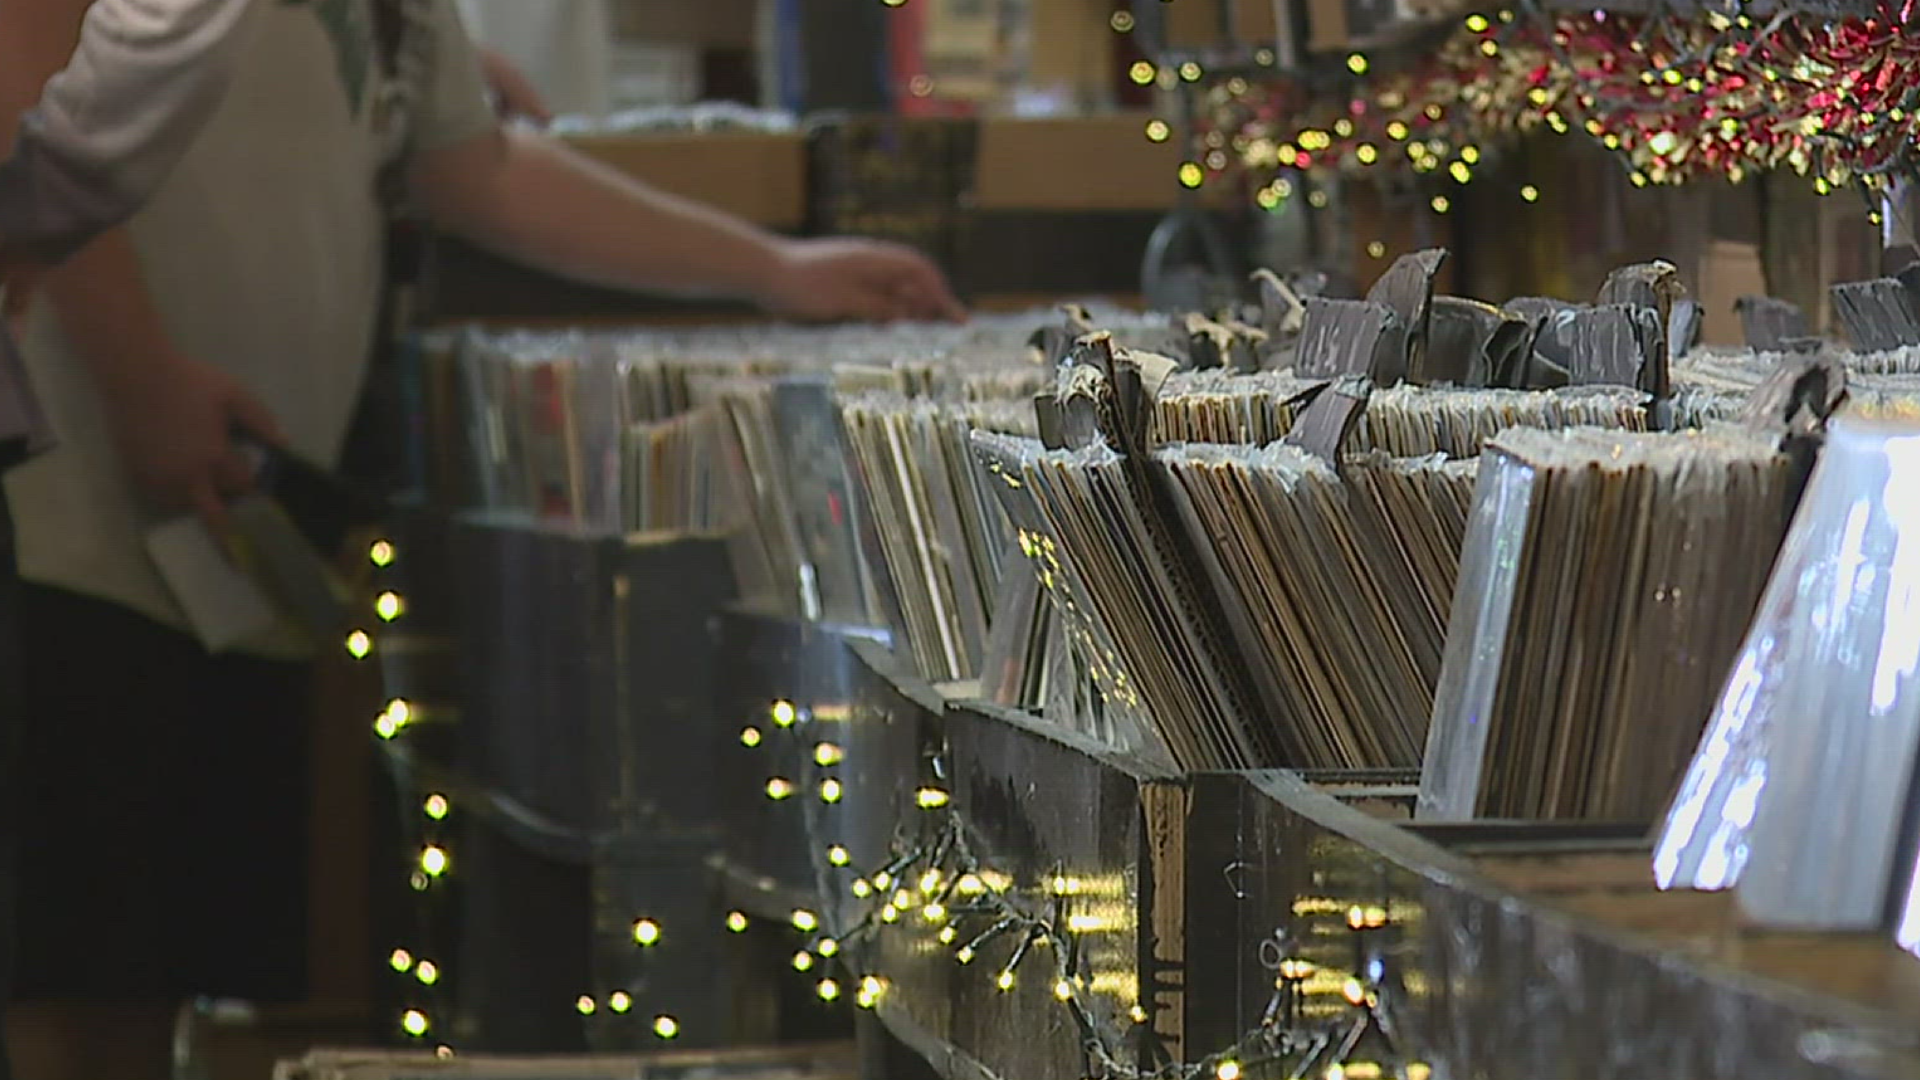 April 20th is National Record Store Day and shops across the country and Pennsylvania are celebrating independent music businesses.